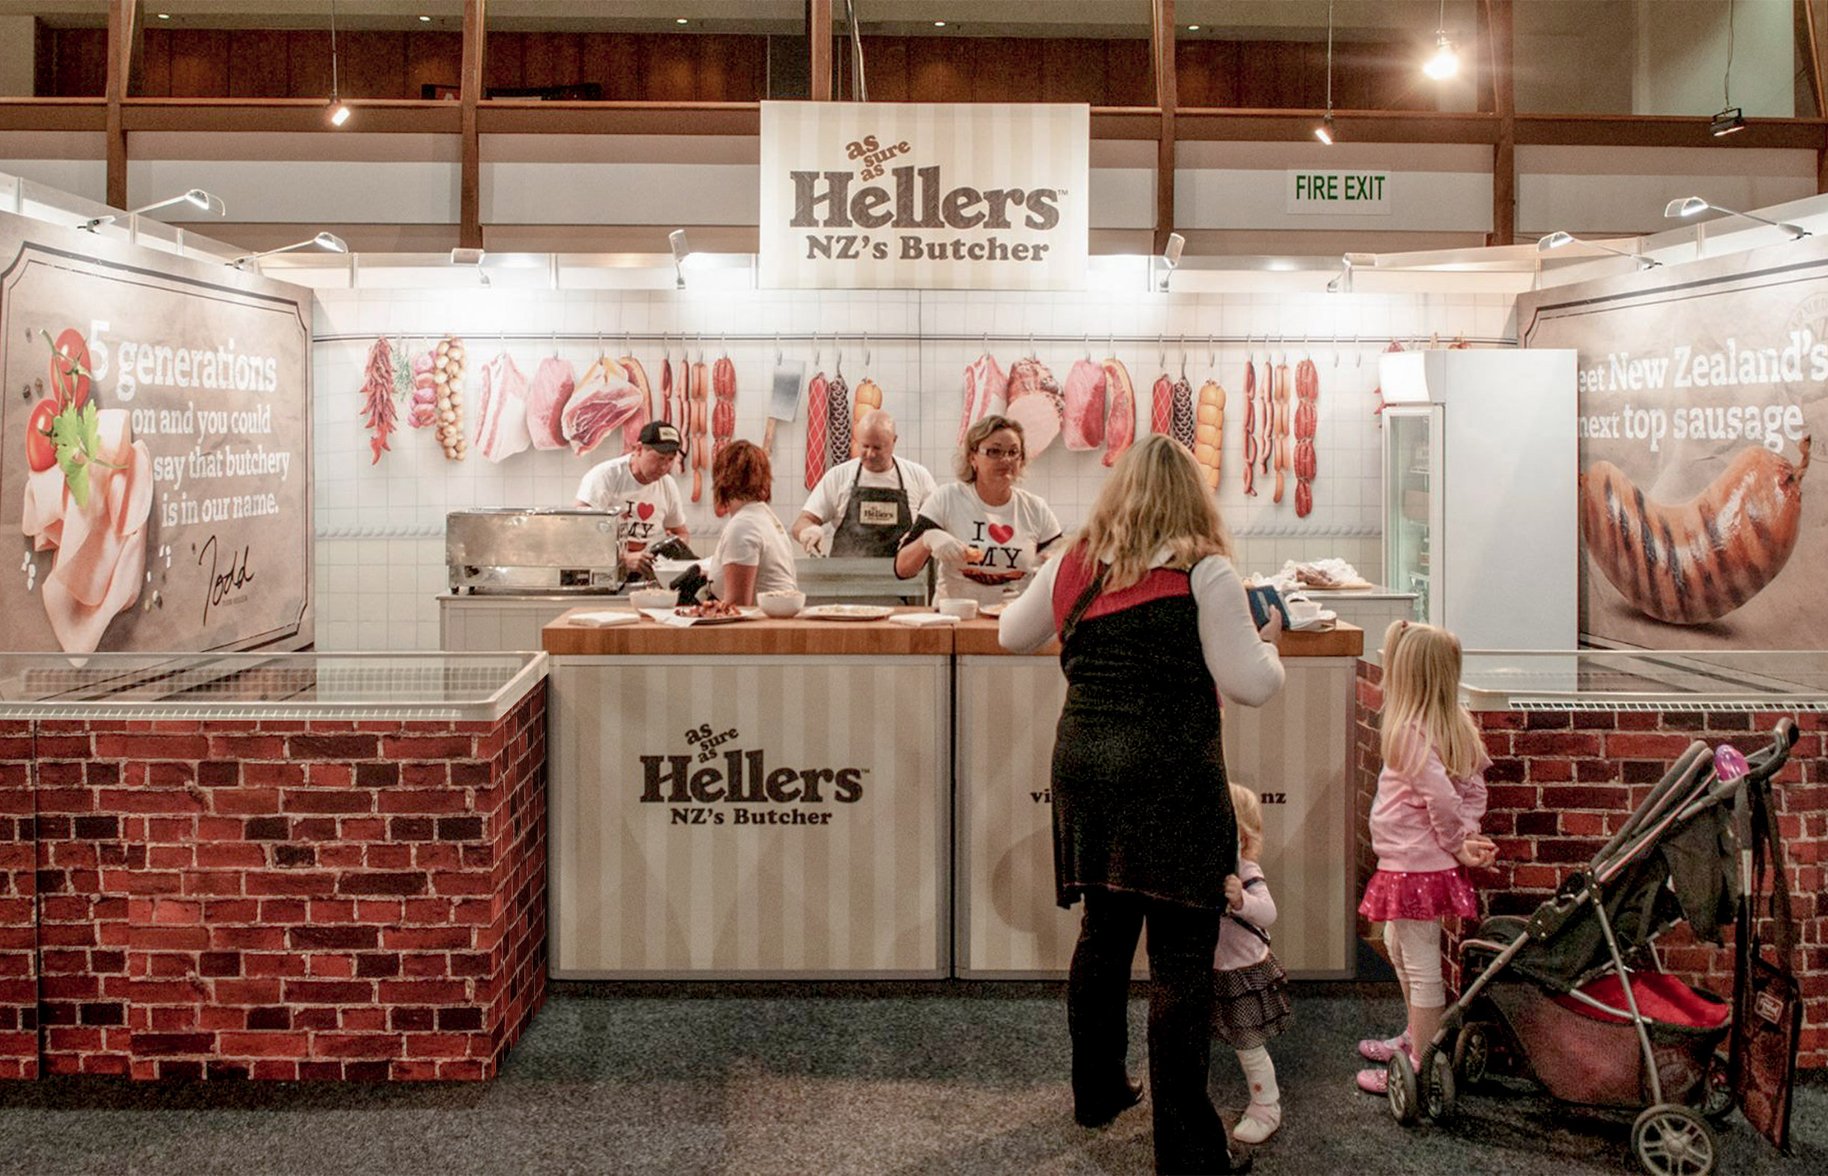 Hellers food show stand spatial design 